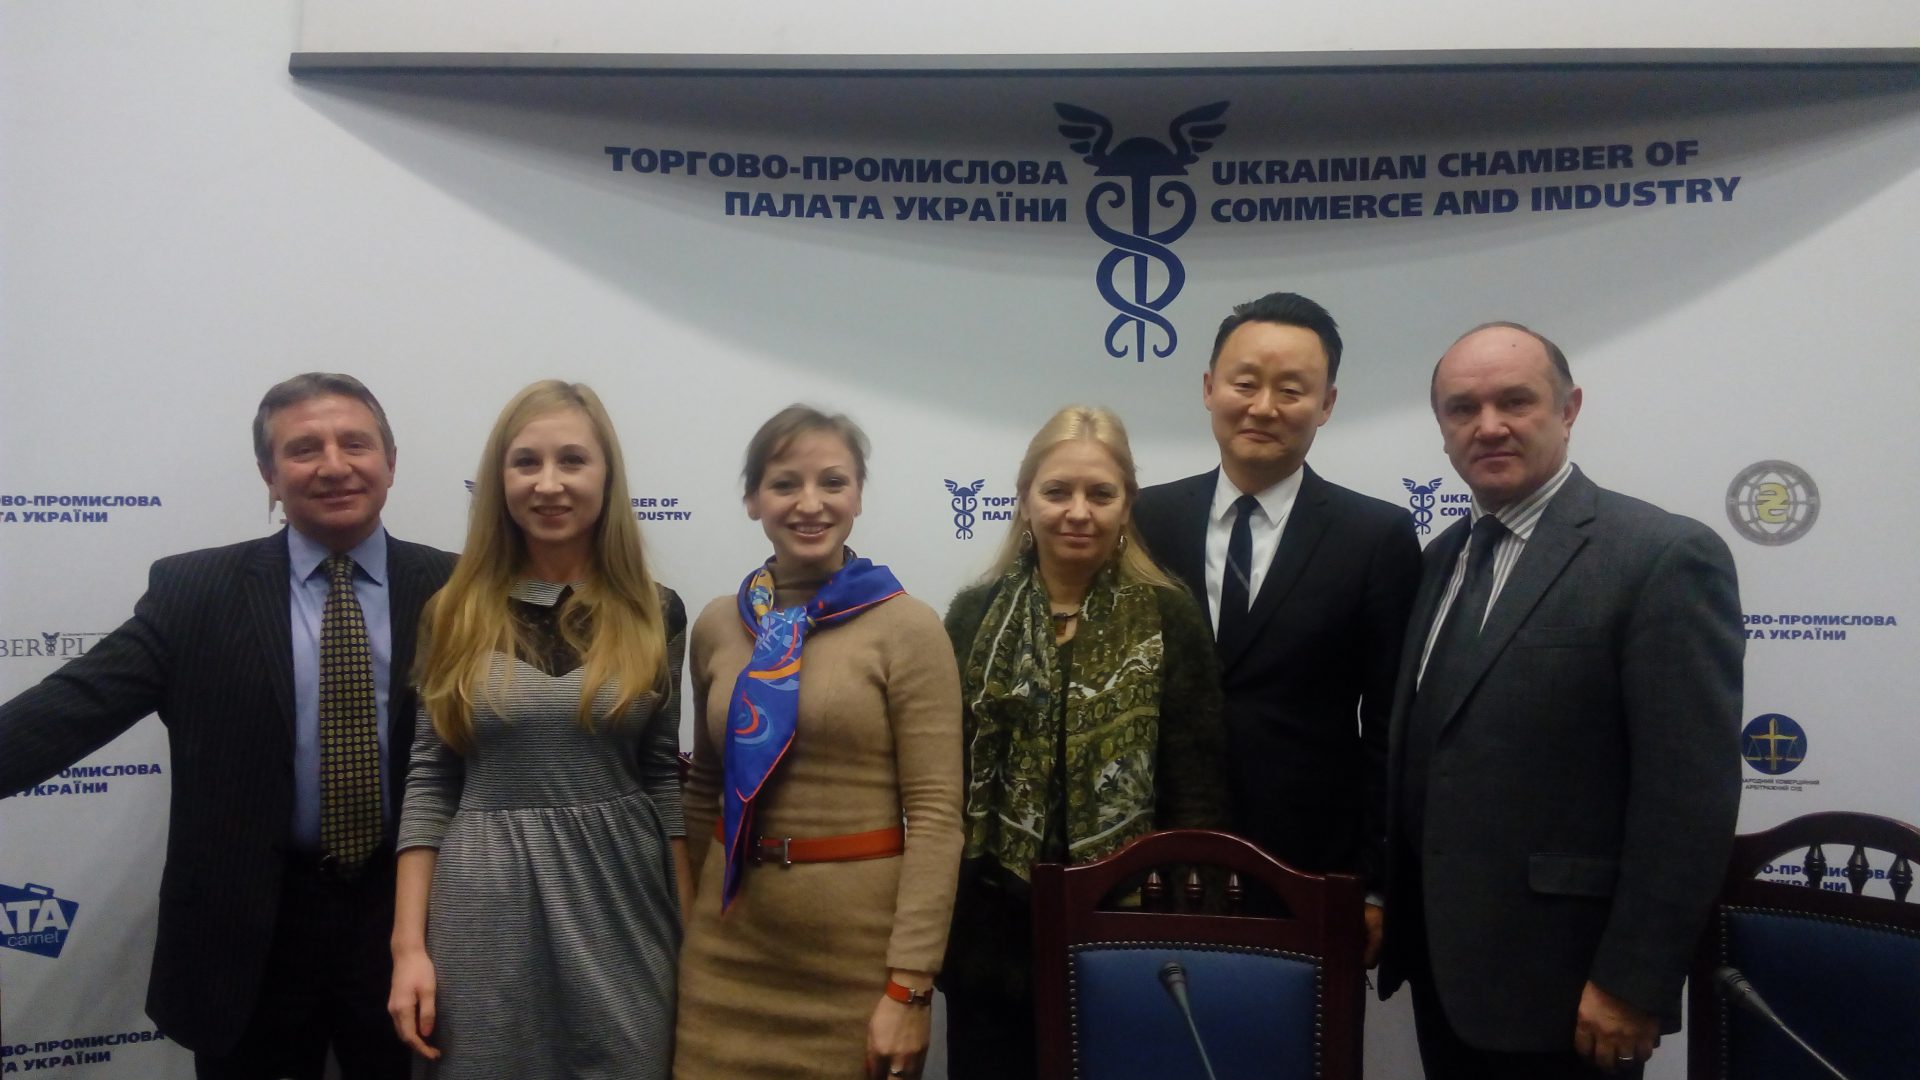 On December 15-16, 2015 in the premises of the Chamber of Trade and Commerce of Ukraine took place a training seminar “PPP as an instrument of investment attraction”